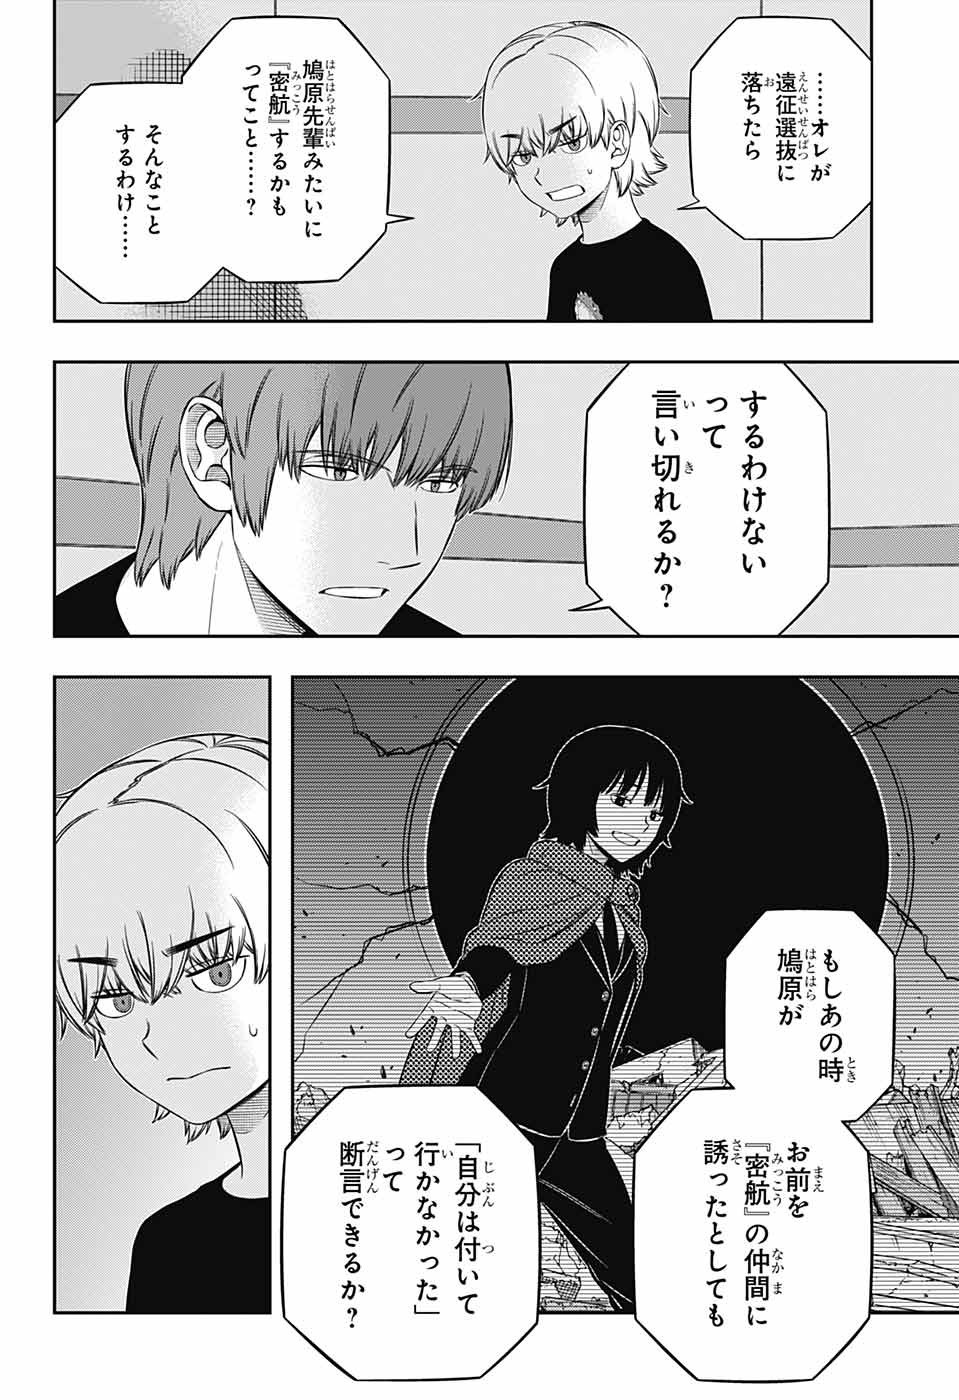 World Trigger - Chapter 237 - Page 2